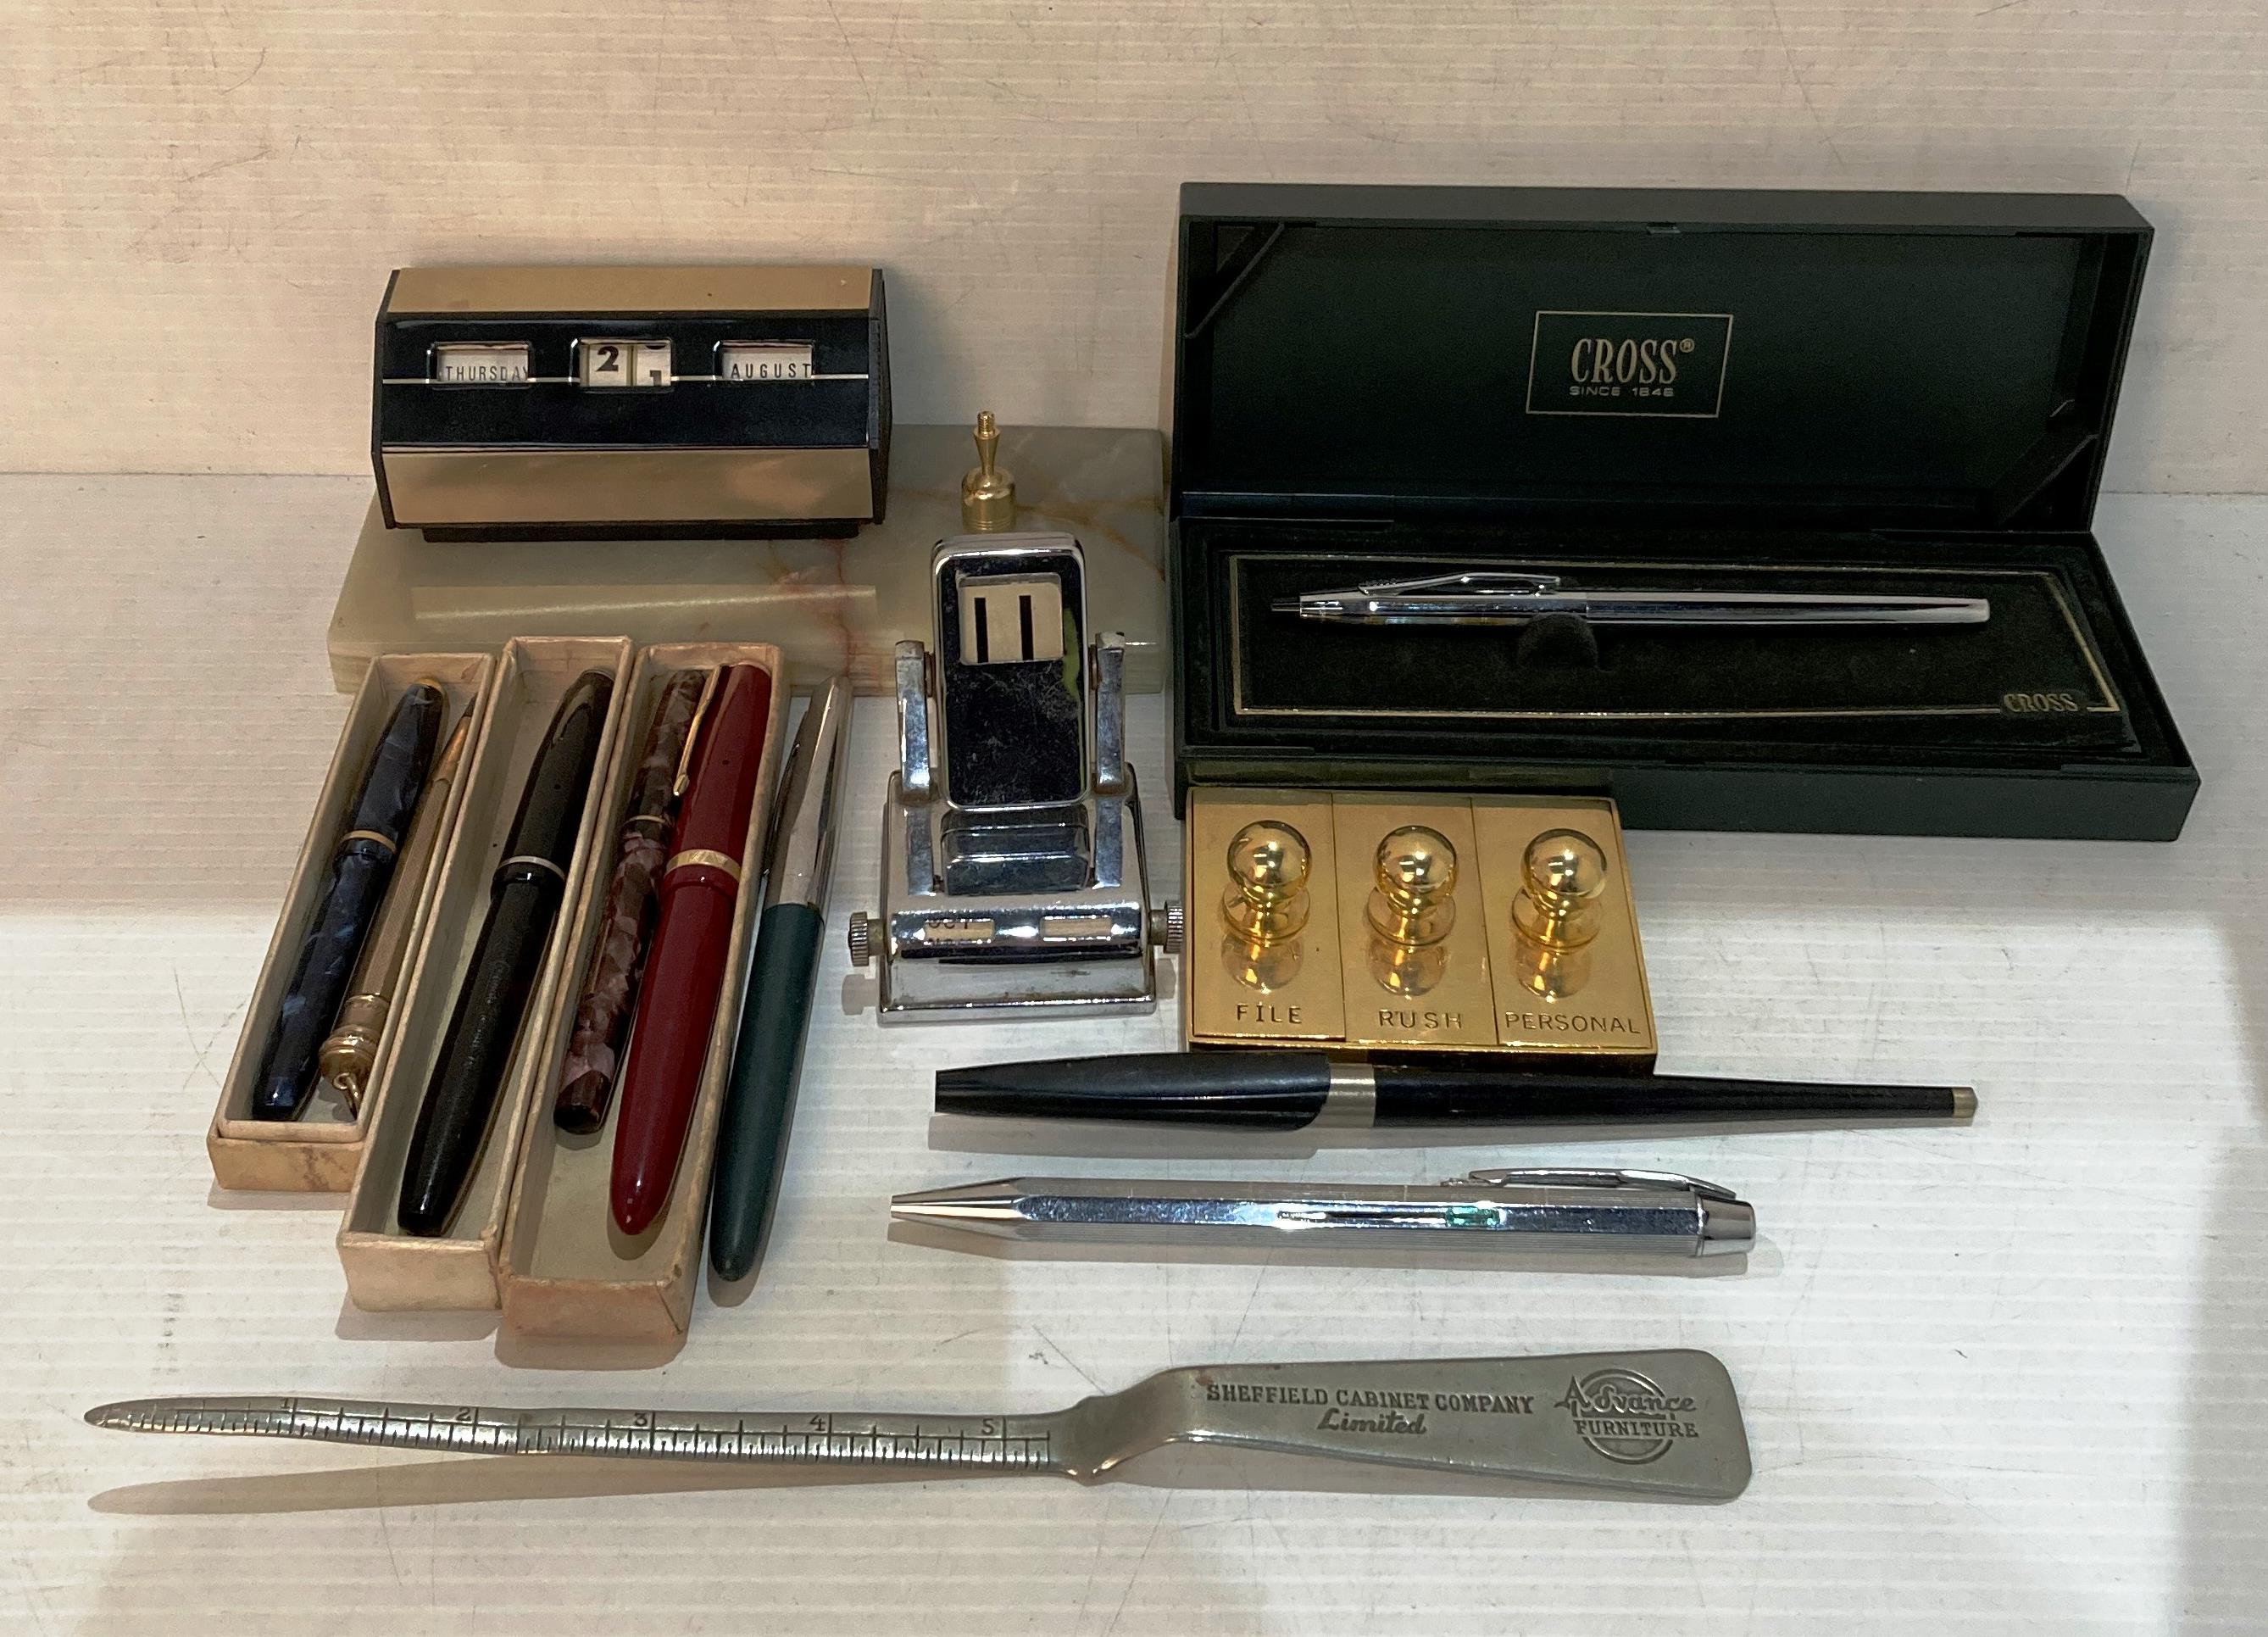 Contents to box - rolled gold propelling pencil, assorted fountain pens, vintage desk-top calendar,